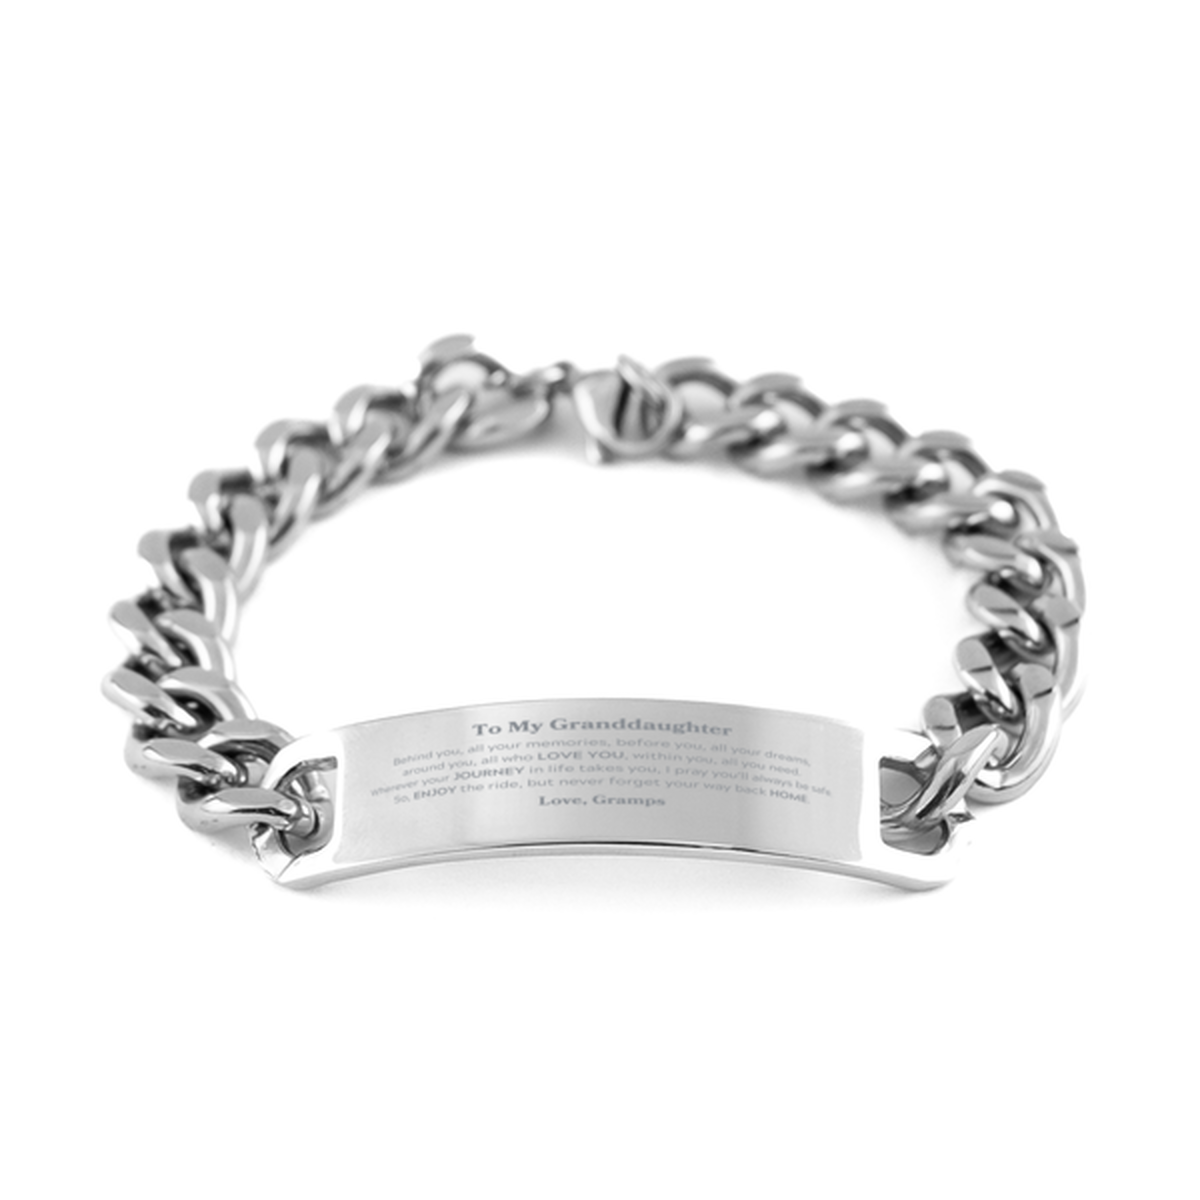 To My Granddaughter Graduation Gifts from Gramps, Granddaughter Cuban Chain Stainless Steel Bracelet Christmas Birthday Gifts for Granddaughter Behind you, all your memories, before you, all your dreams. Love, Gramps